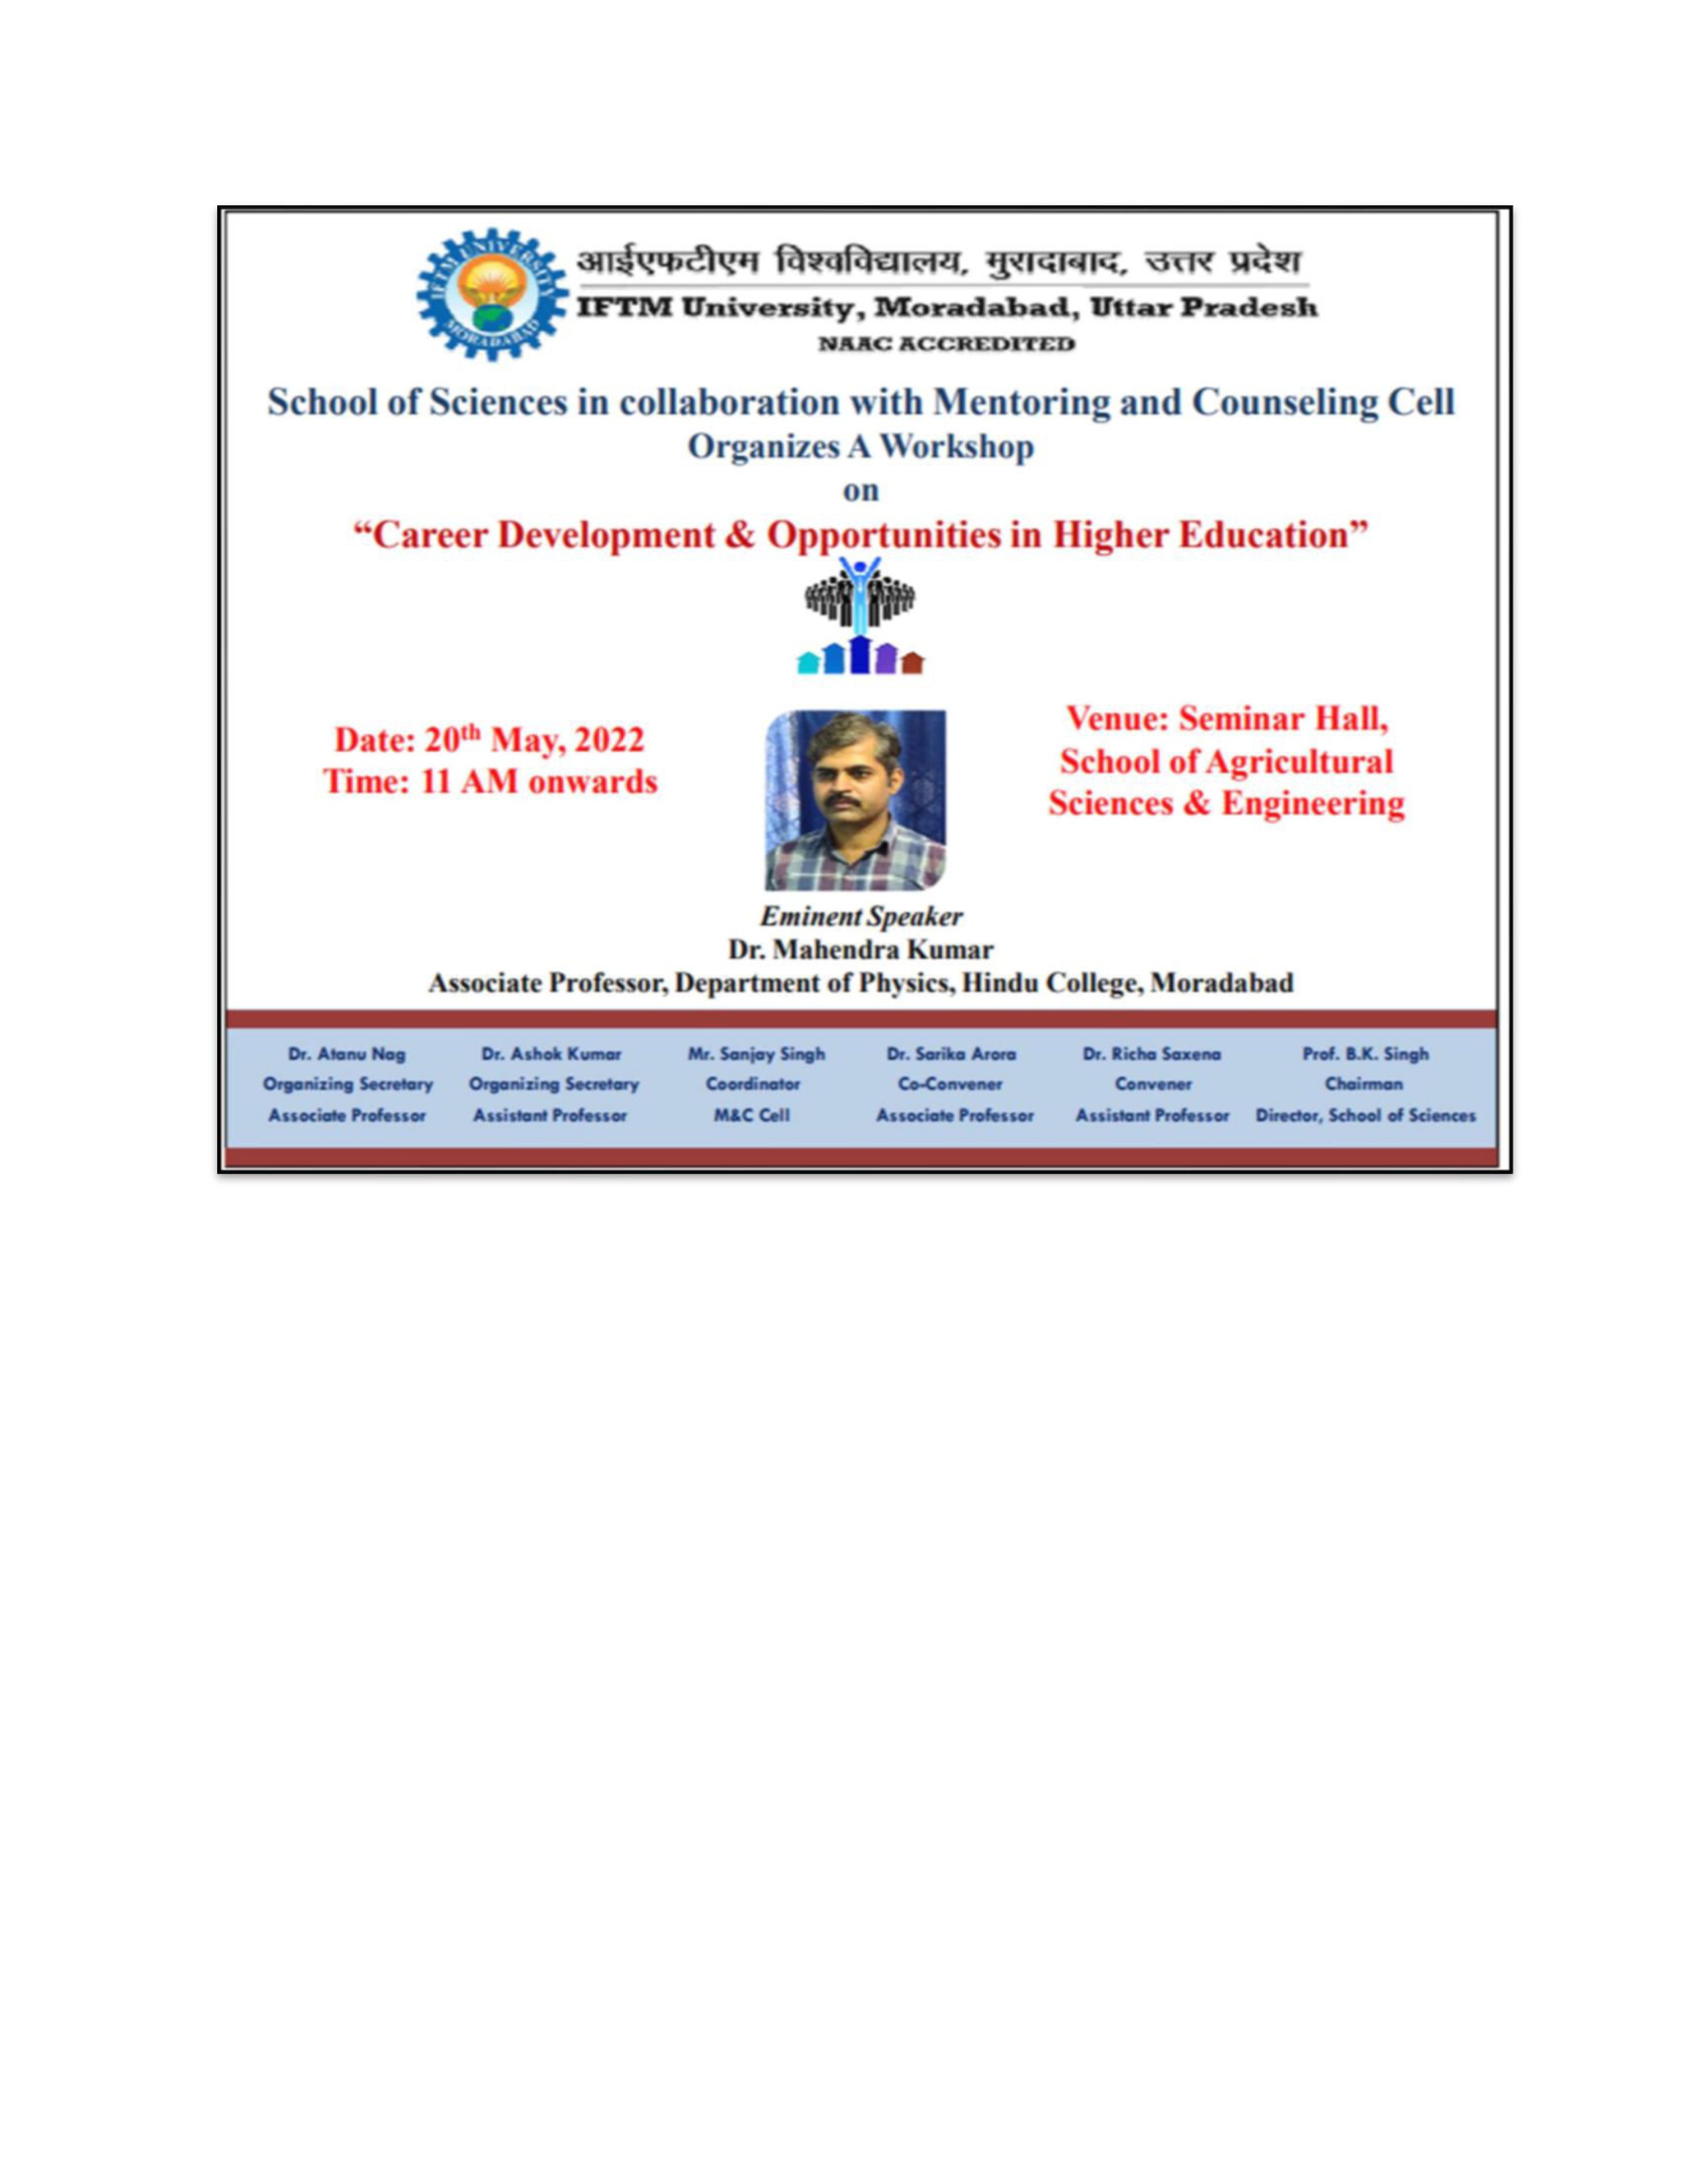 A Workshop on Career Development & Opportunities In Higher Education